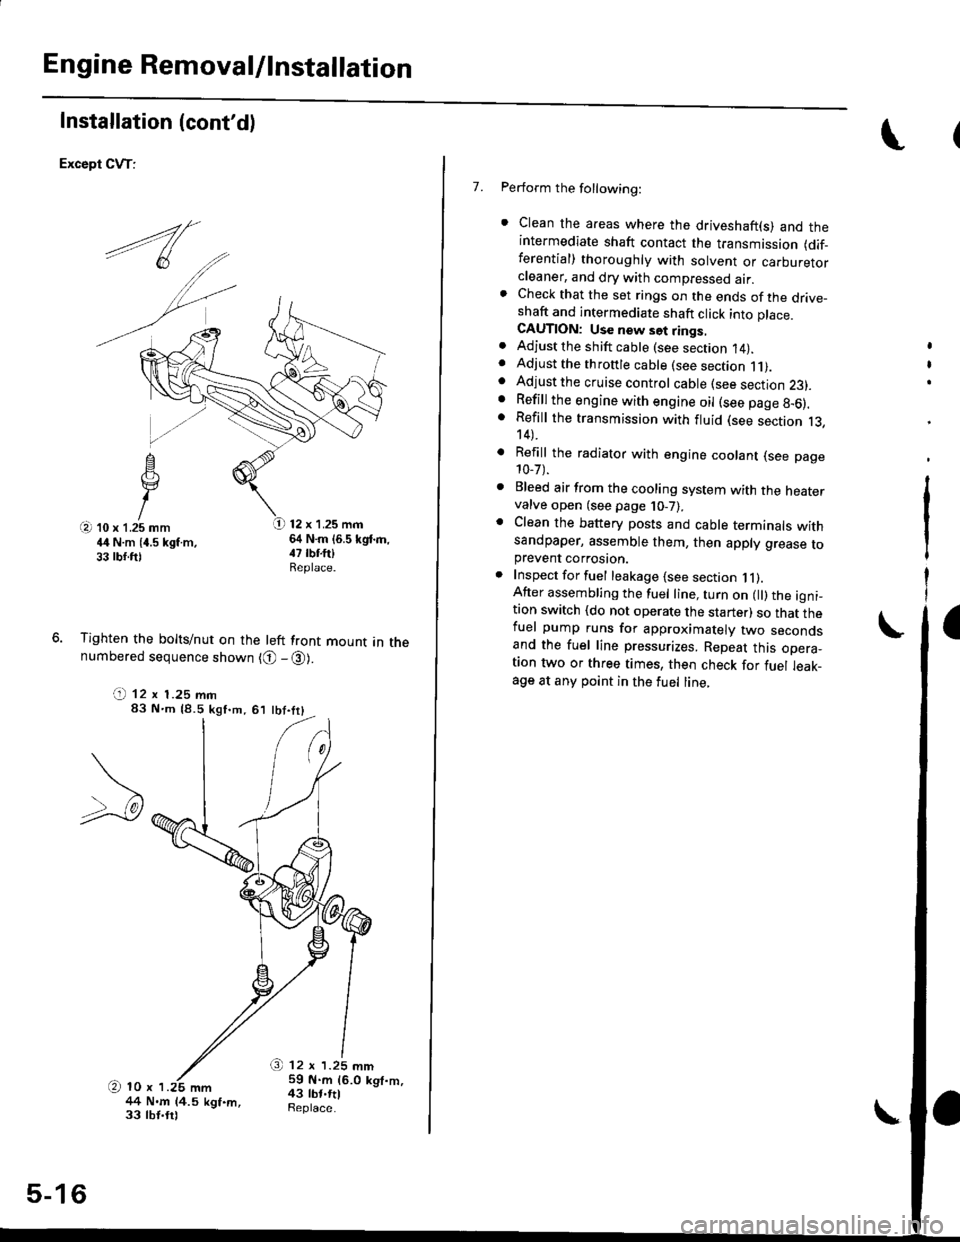 HONDA CIVIC 1996 6.G Workshop Manual Engine Removal/lnstallation
Installation (contd)
Except CVT:
12 x 1.25 mm64 N.m (6.5 kgd.m,
Tighten the bolts/nut on the left front mount in thenumbered sequence shown {O - @).
(t 12 x 1.25 mm83 Nm 